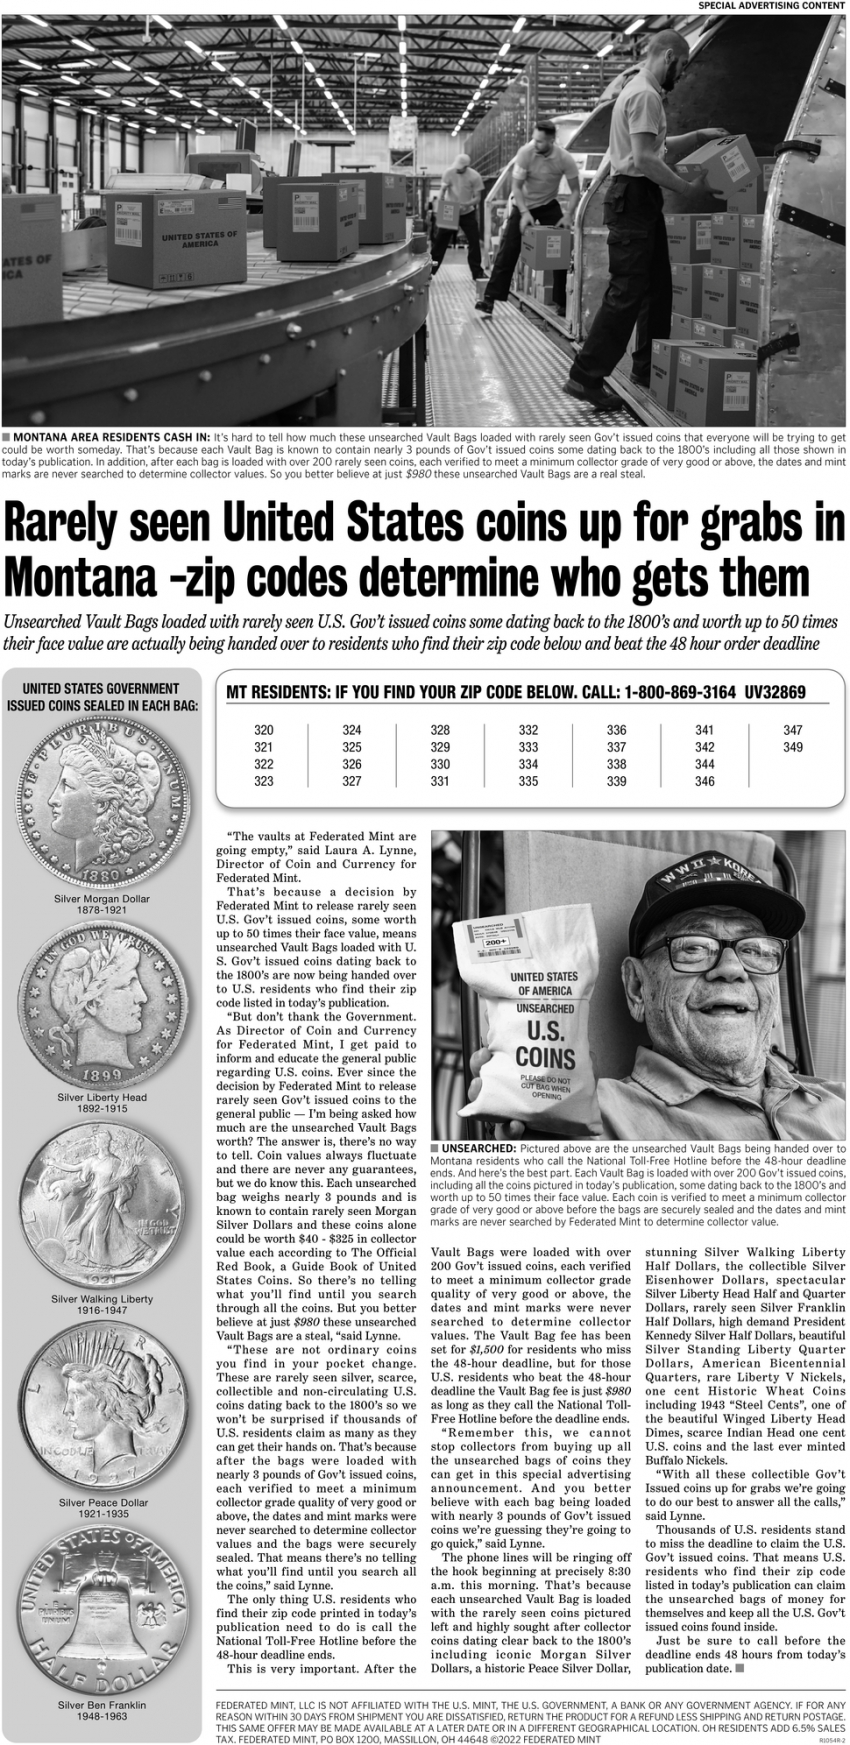 Rarely Seen United States Coins Up For Grabs in Montana